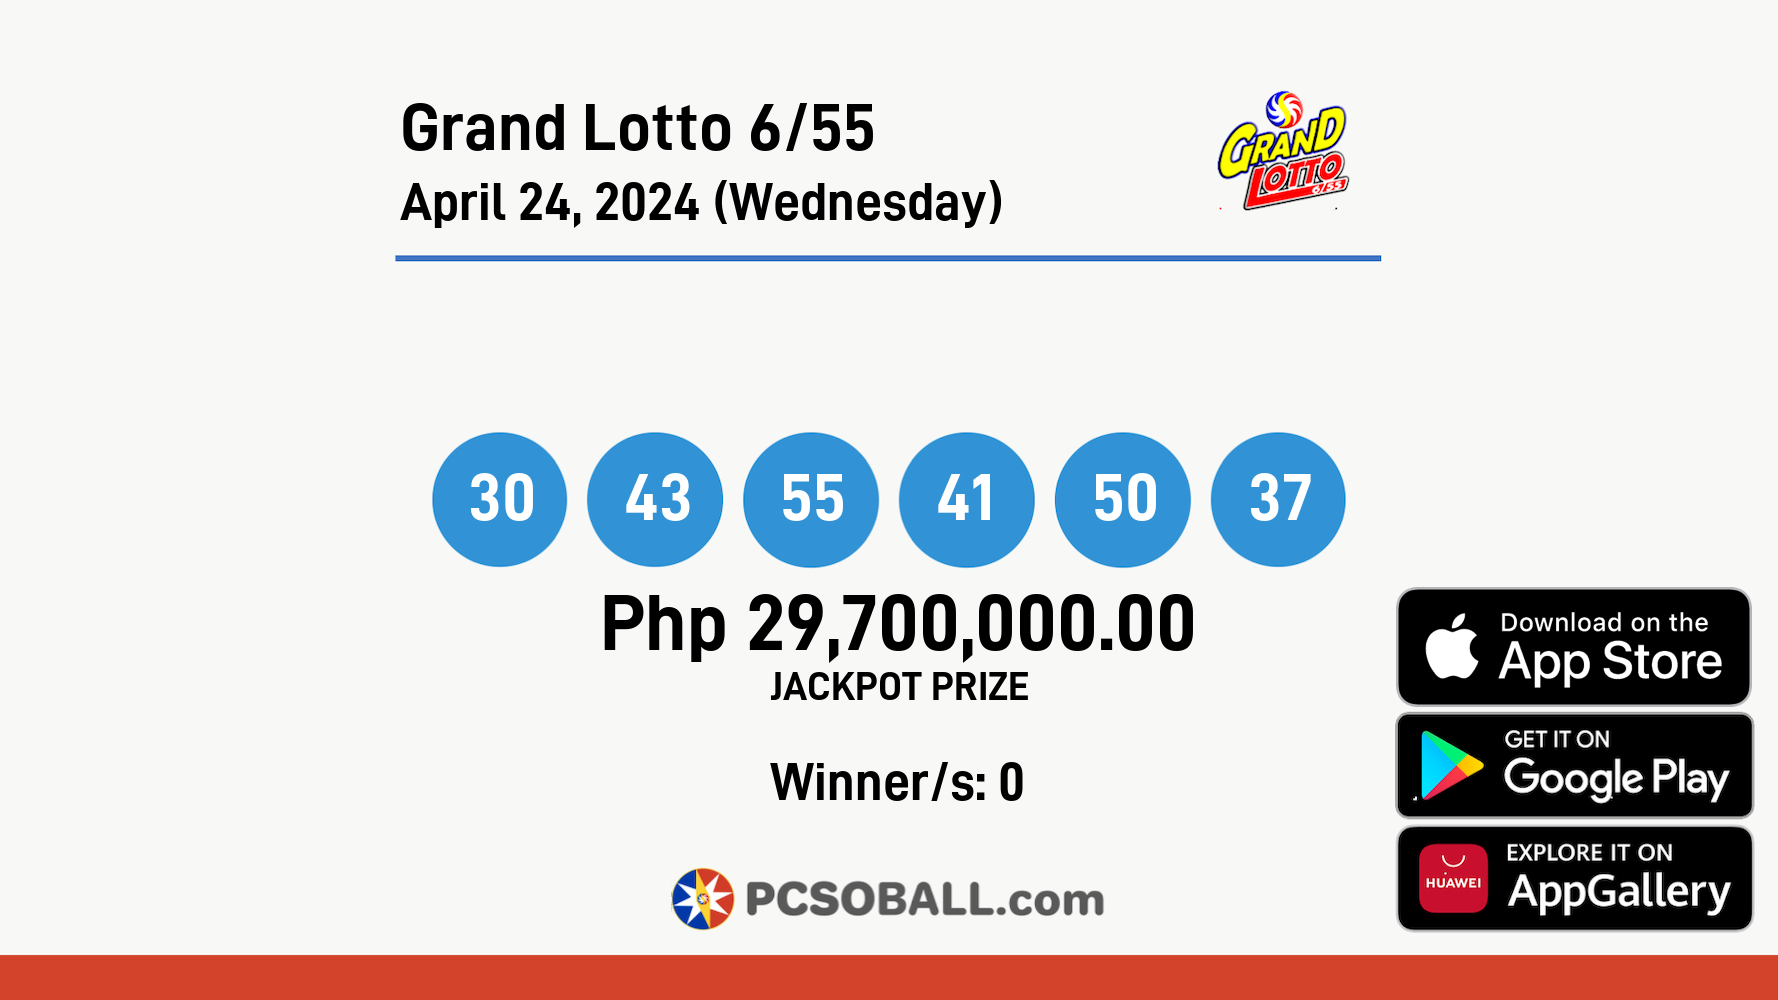 Grand Lotto 6/55 April 24, 2024 (Wednesday) Result